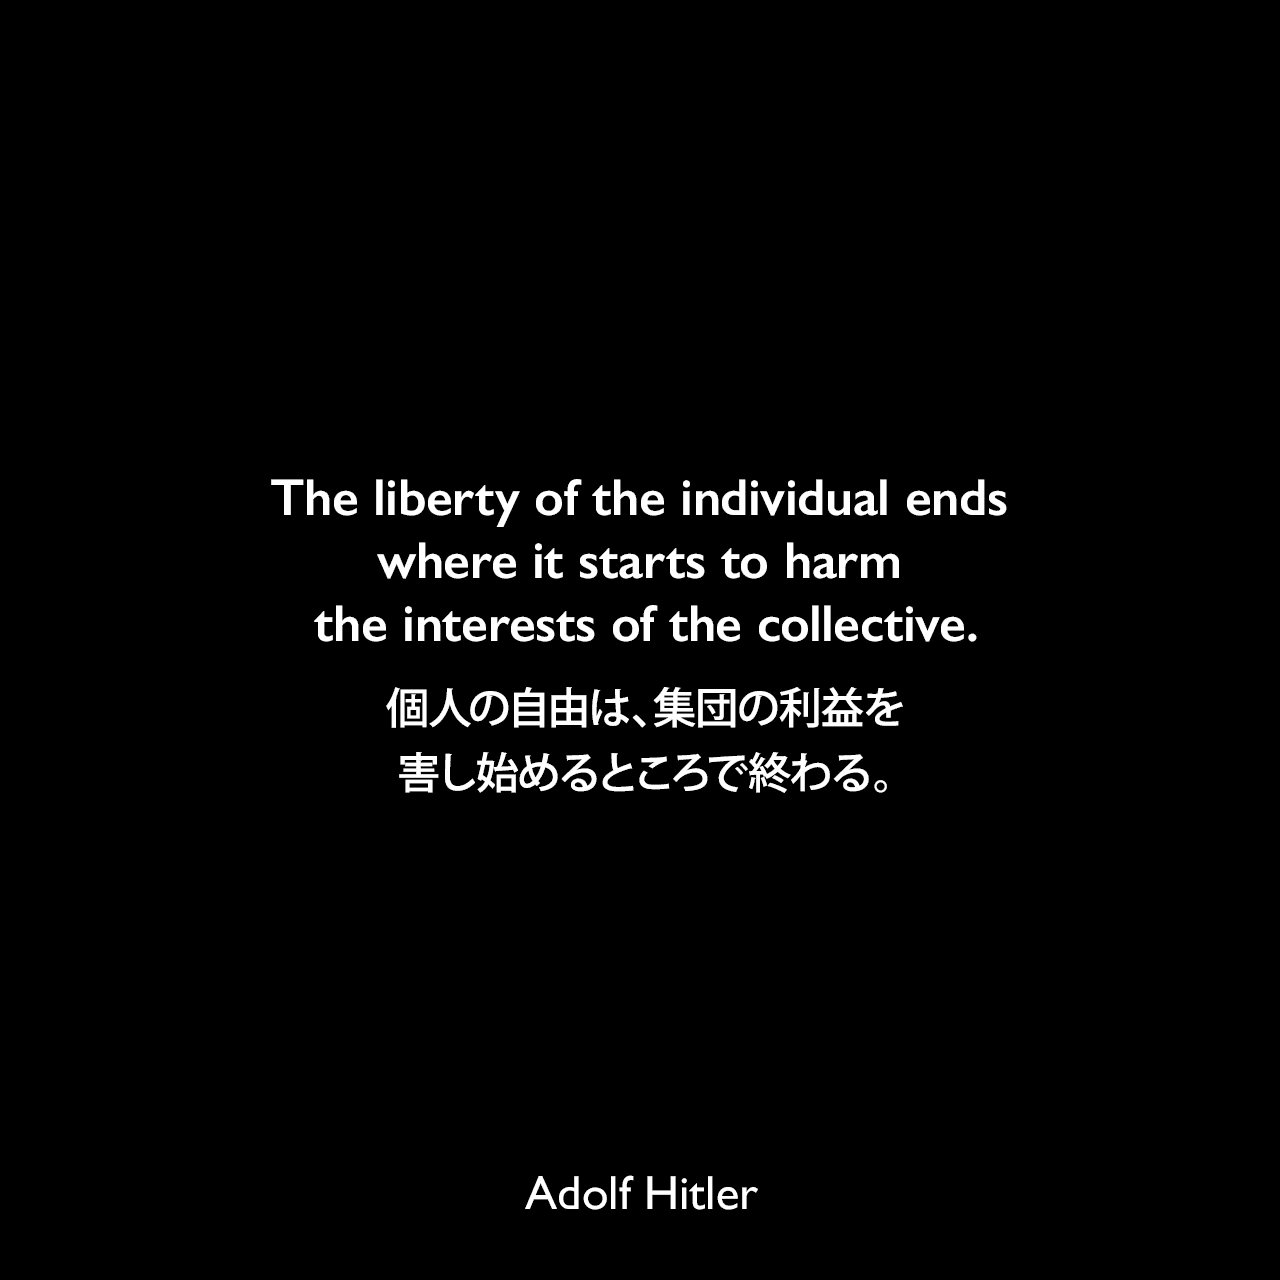 The liberty of the individual ends where it starts to harm the interests of the collective.個人の自由は、集団の利益を害し始めるところで終わる。- 1939年5月1日ベルリンのルストガルテンでのスピーチよりAdolf Hitler